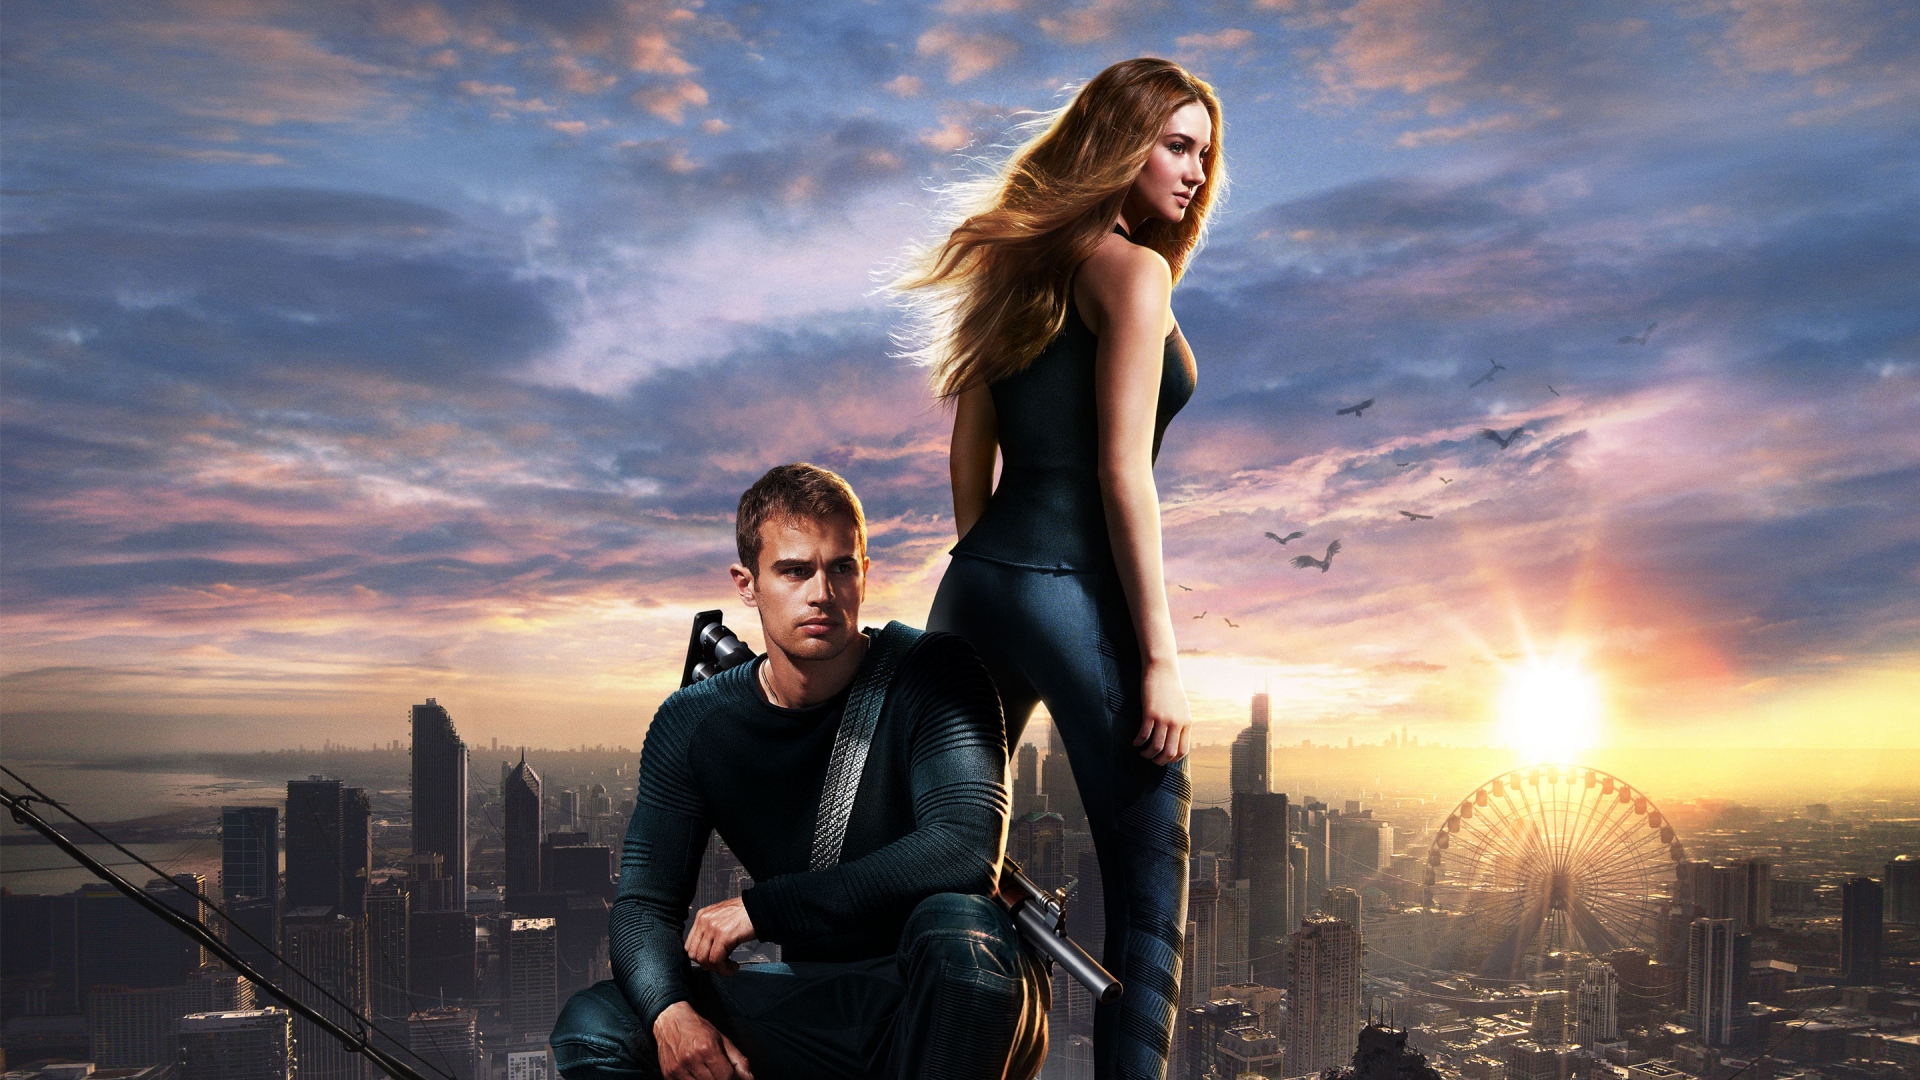 Starz To Develop Ascendant, A TV Series Based on Divergent Movies